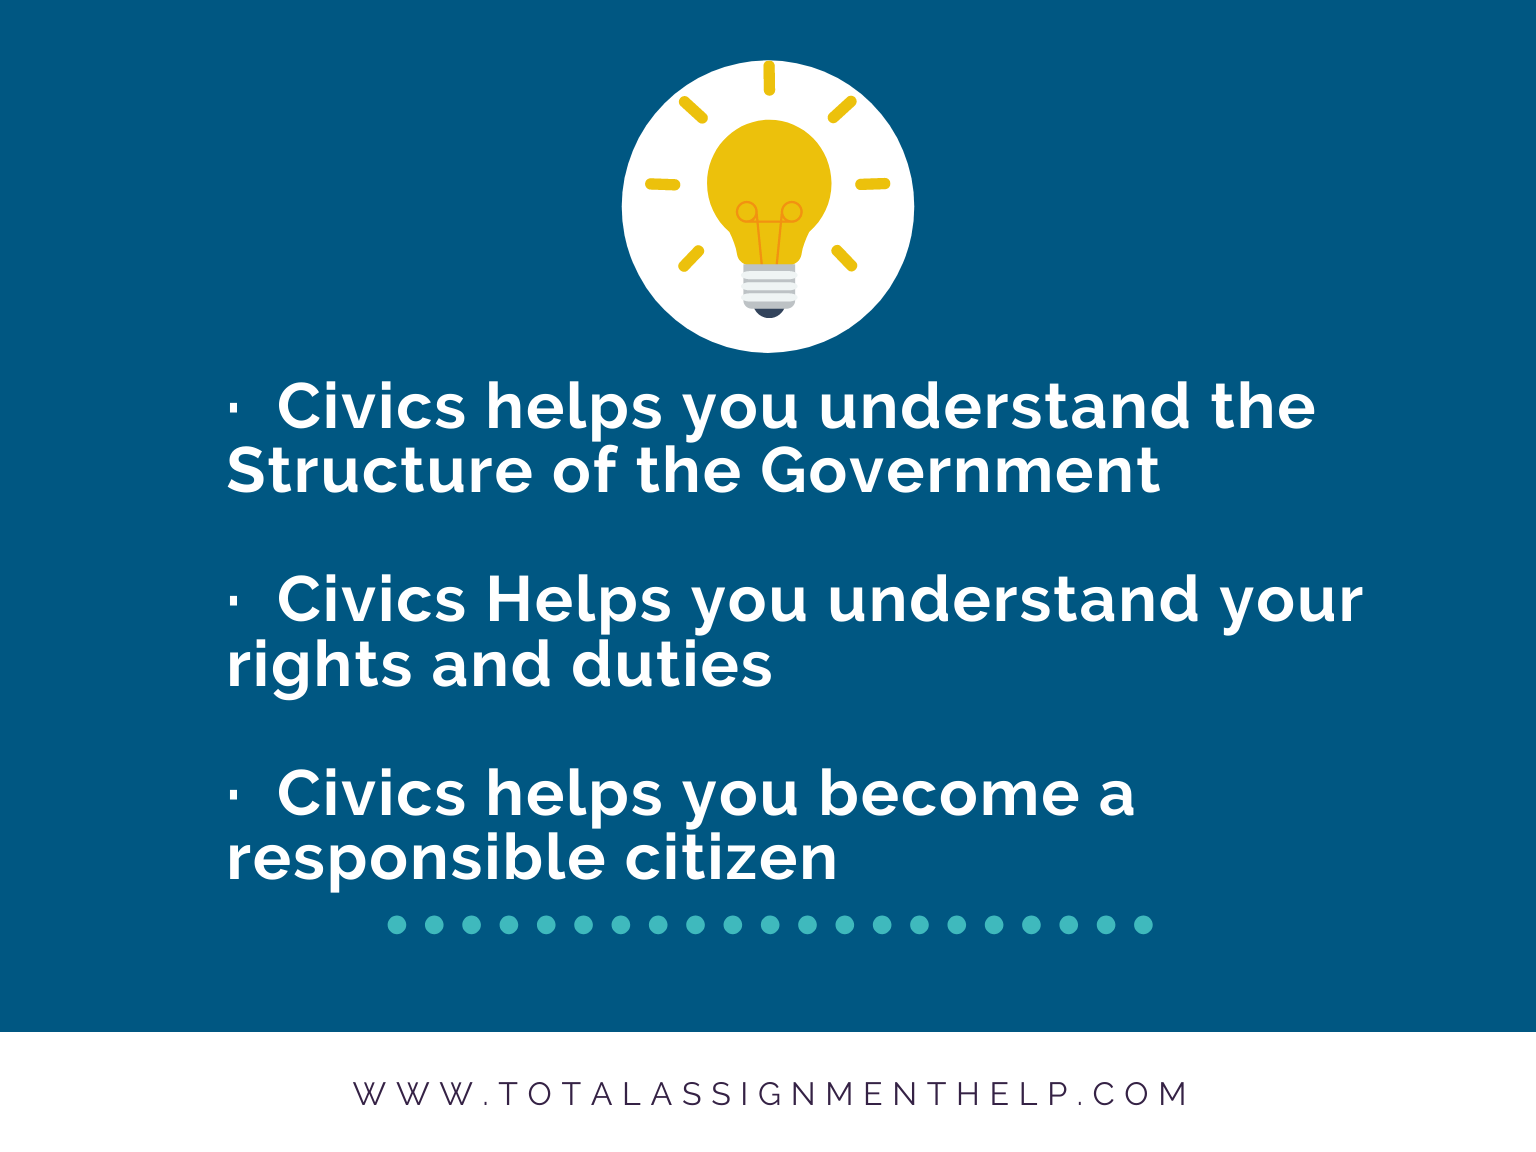 importance of values to the society in civic education